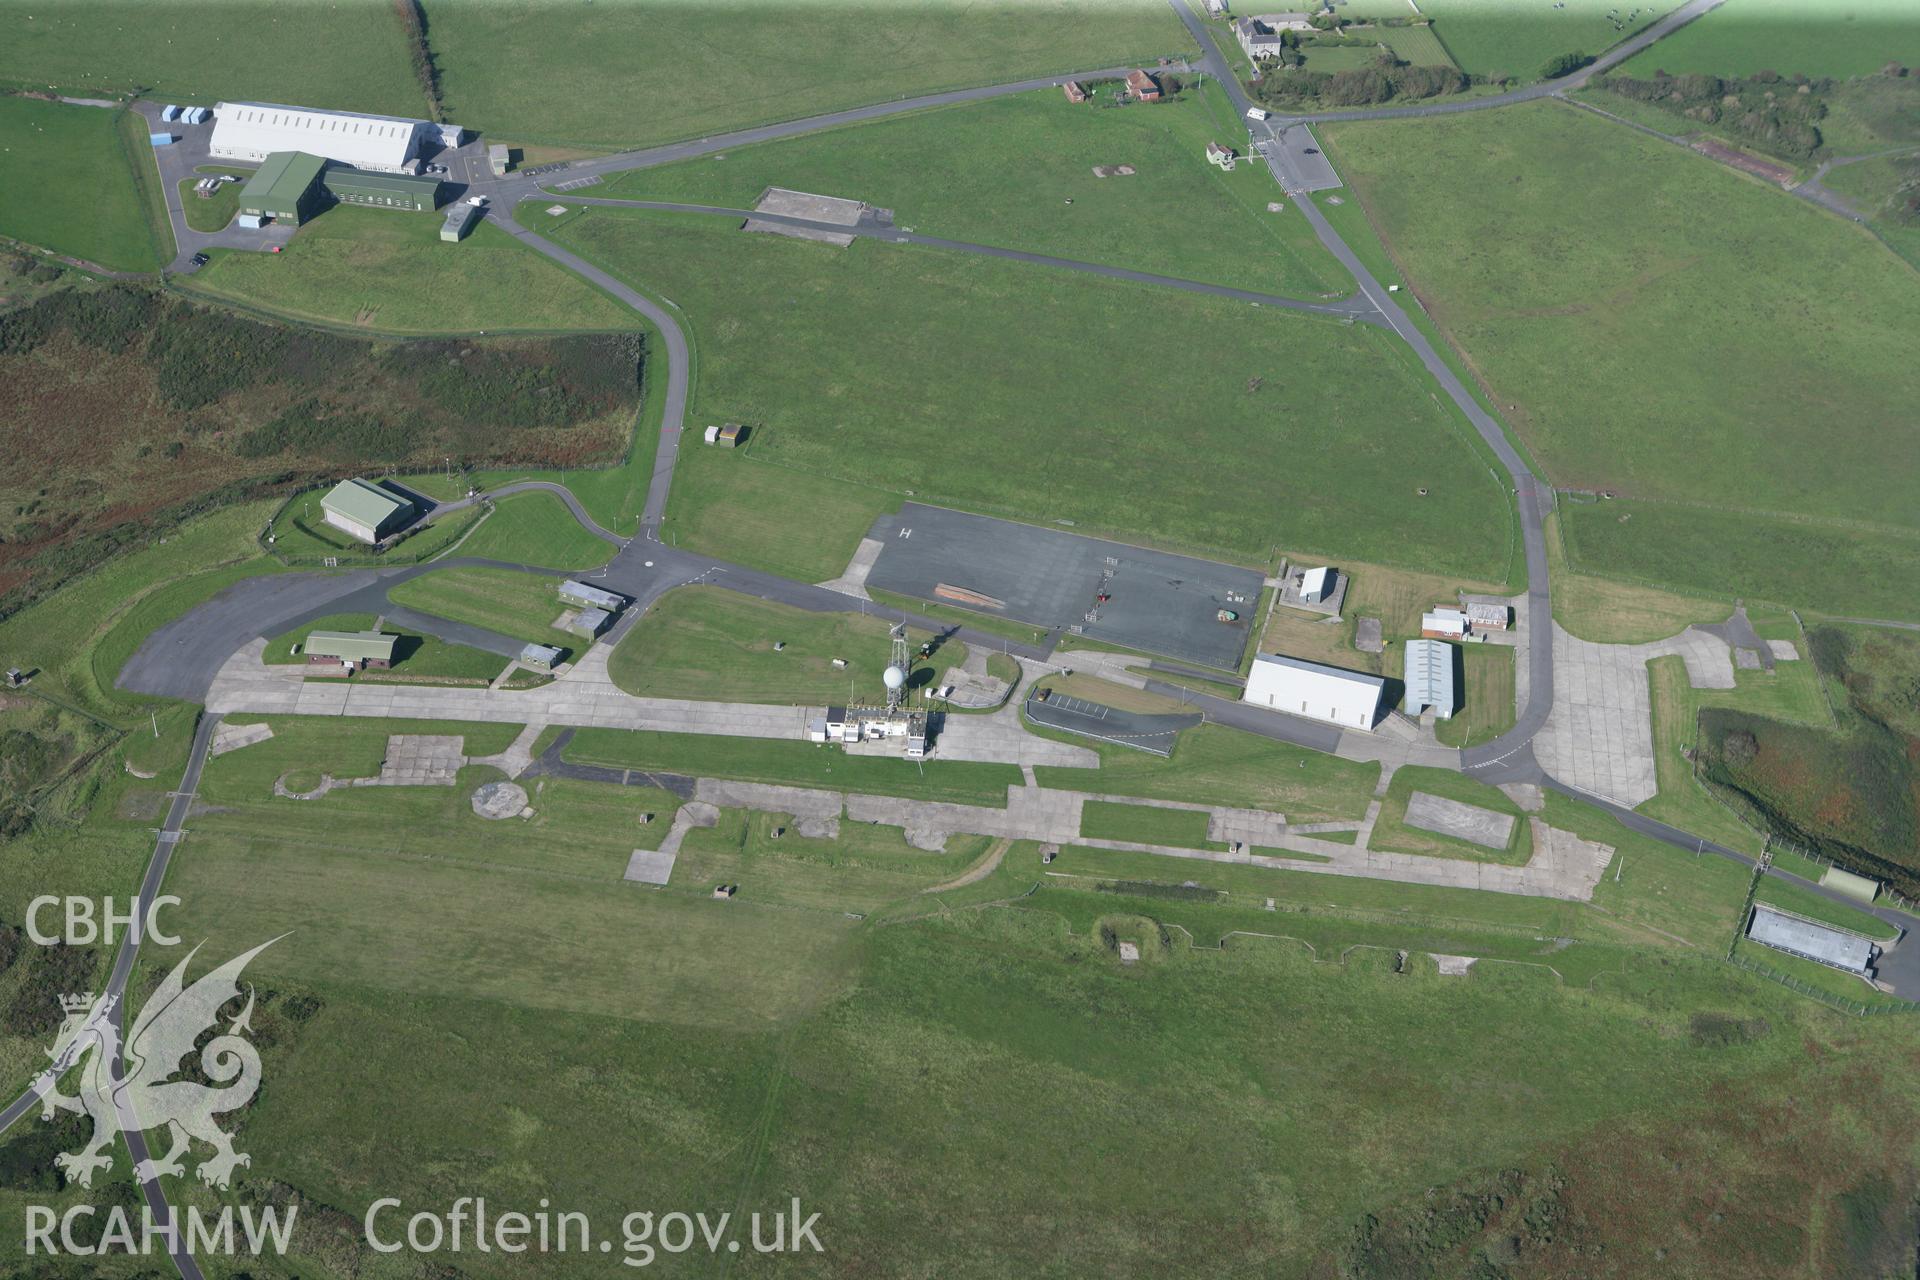 RCAHMW colour oblique photograph of Manorbier Airfield. Taken by Toby Driver and Oliver Davies on 28/09/2011.